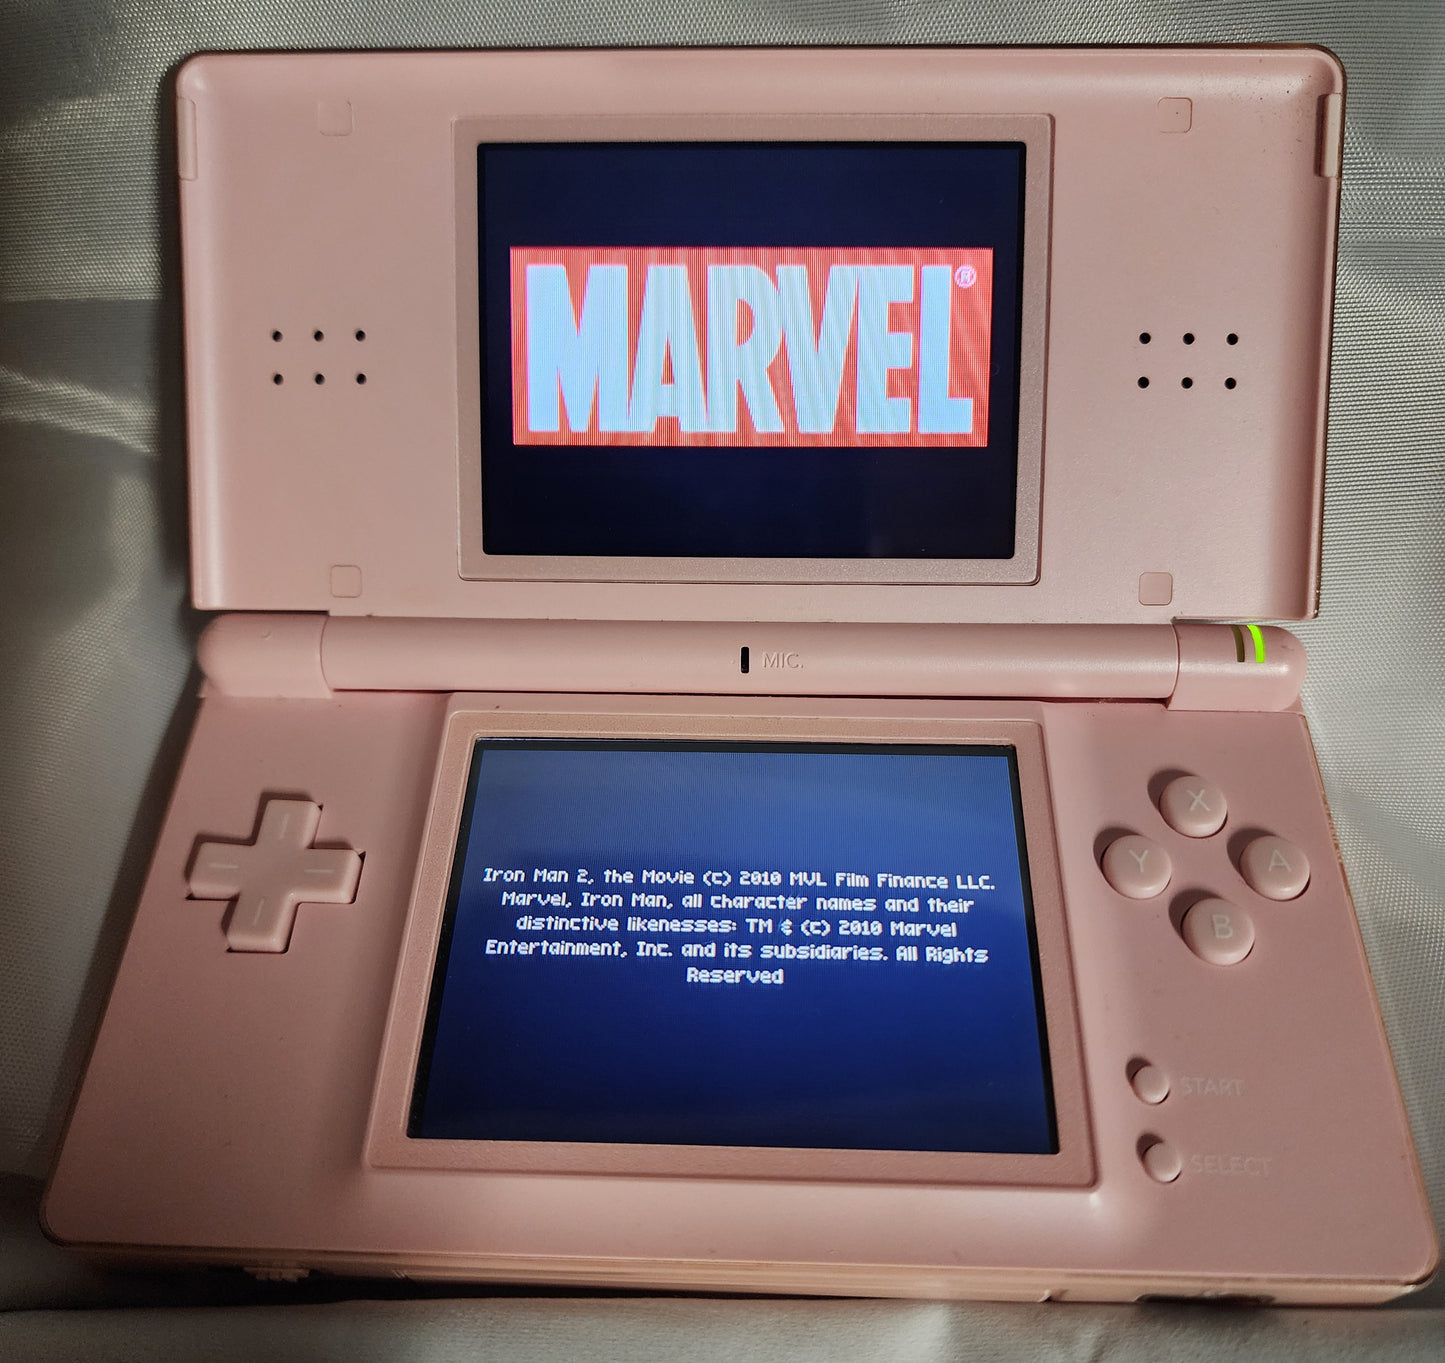 Pink DSlite. Stylus Included. Works Great. No Charger